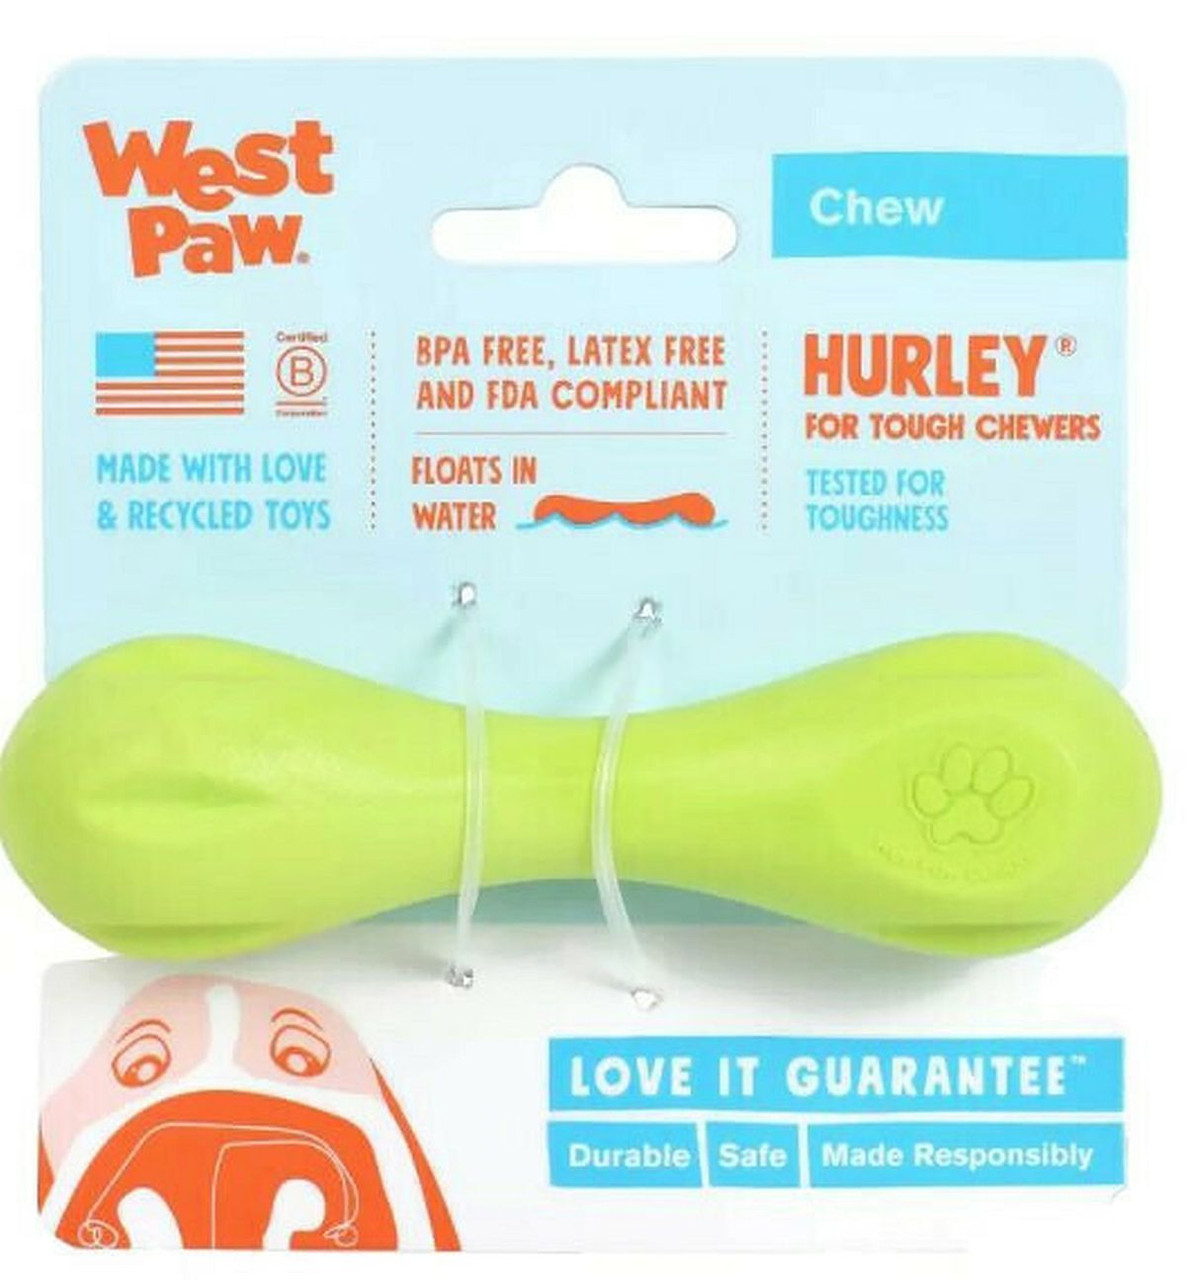 https://cdn11.bigcommerce.com/s-bgjc1kd1rm/images/stencil/1280x1280/products/2319/3280/West-Paw-Hurley-Dog-Toy-Granny-Smith-Apple-XS__12712.1618448369.jpg?c=1